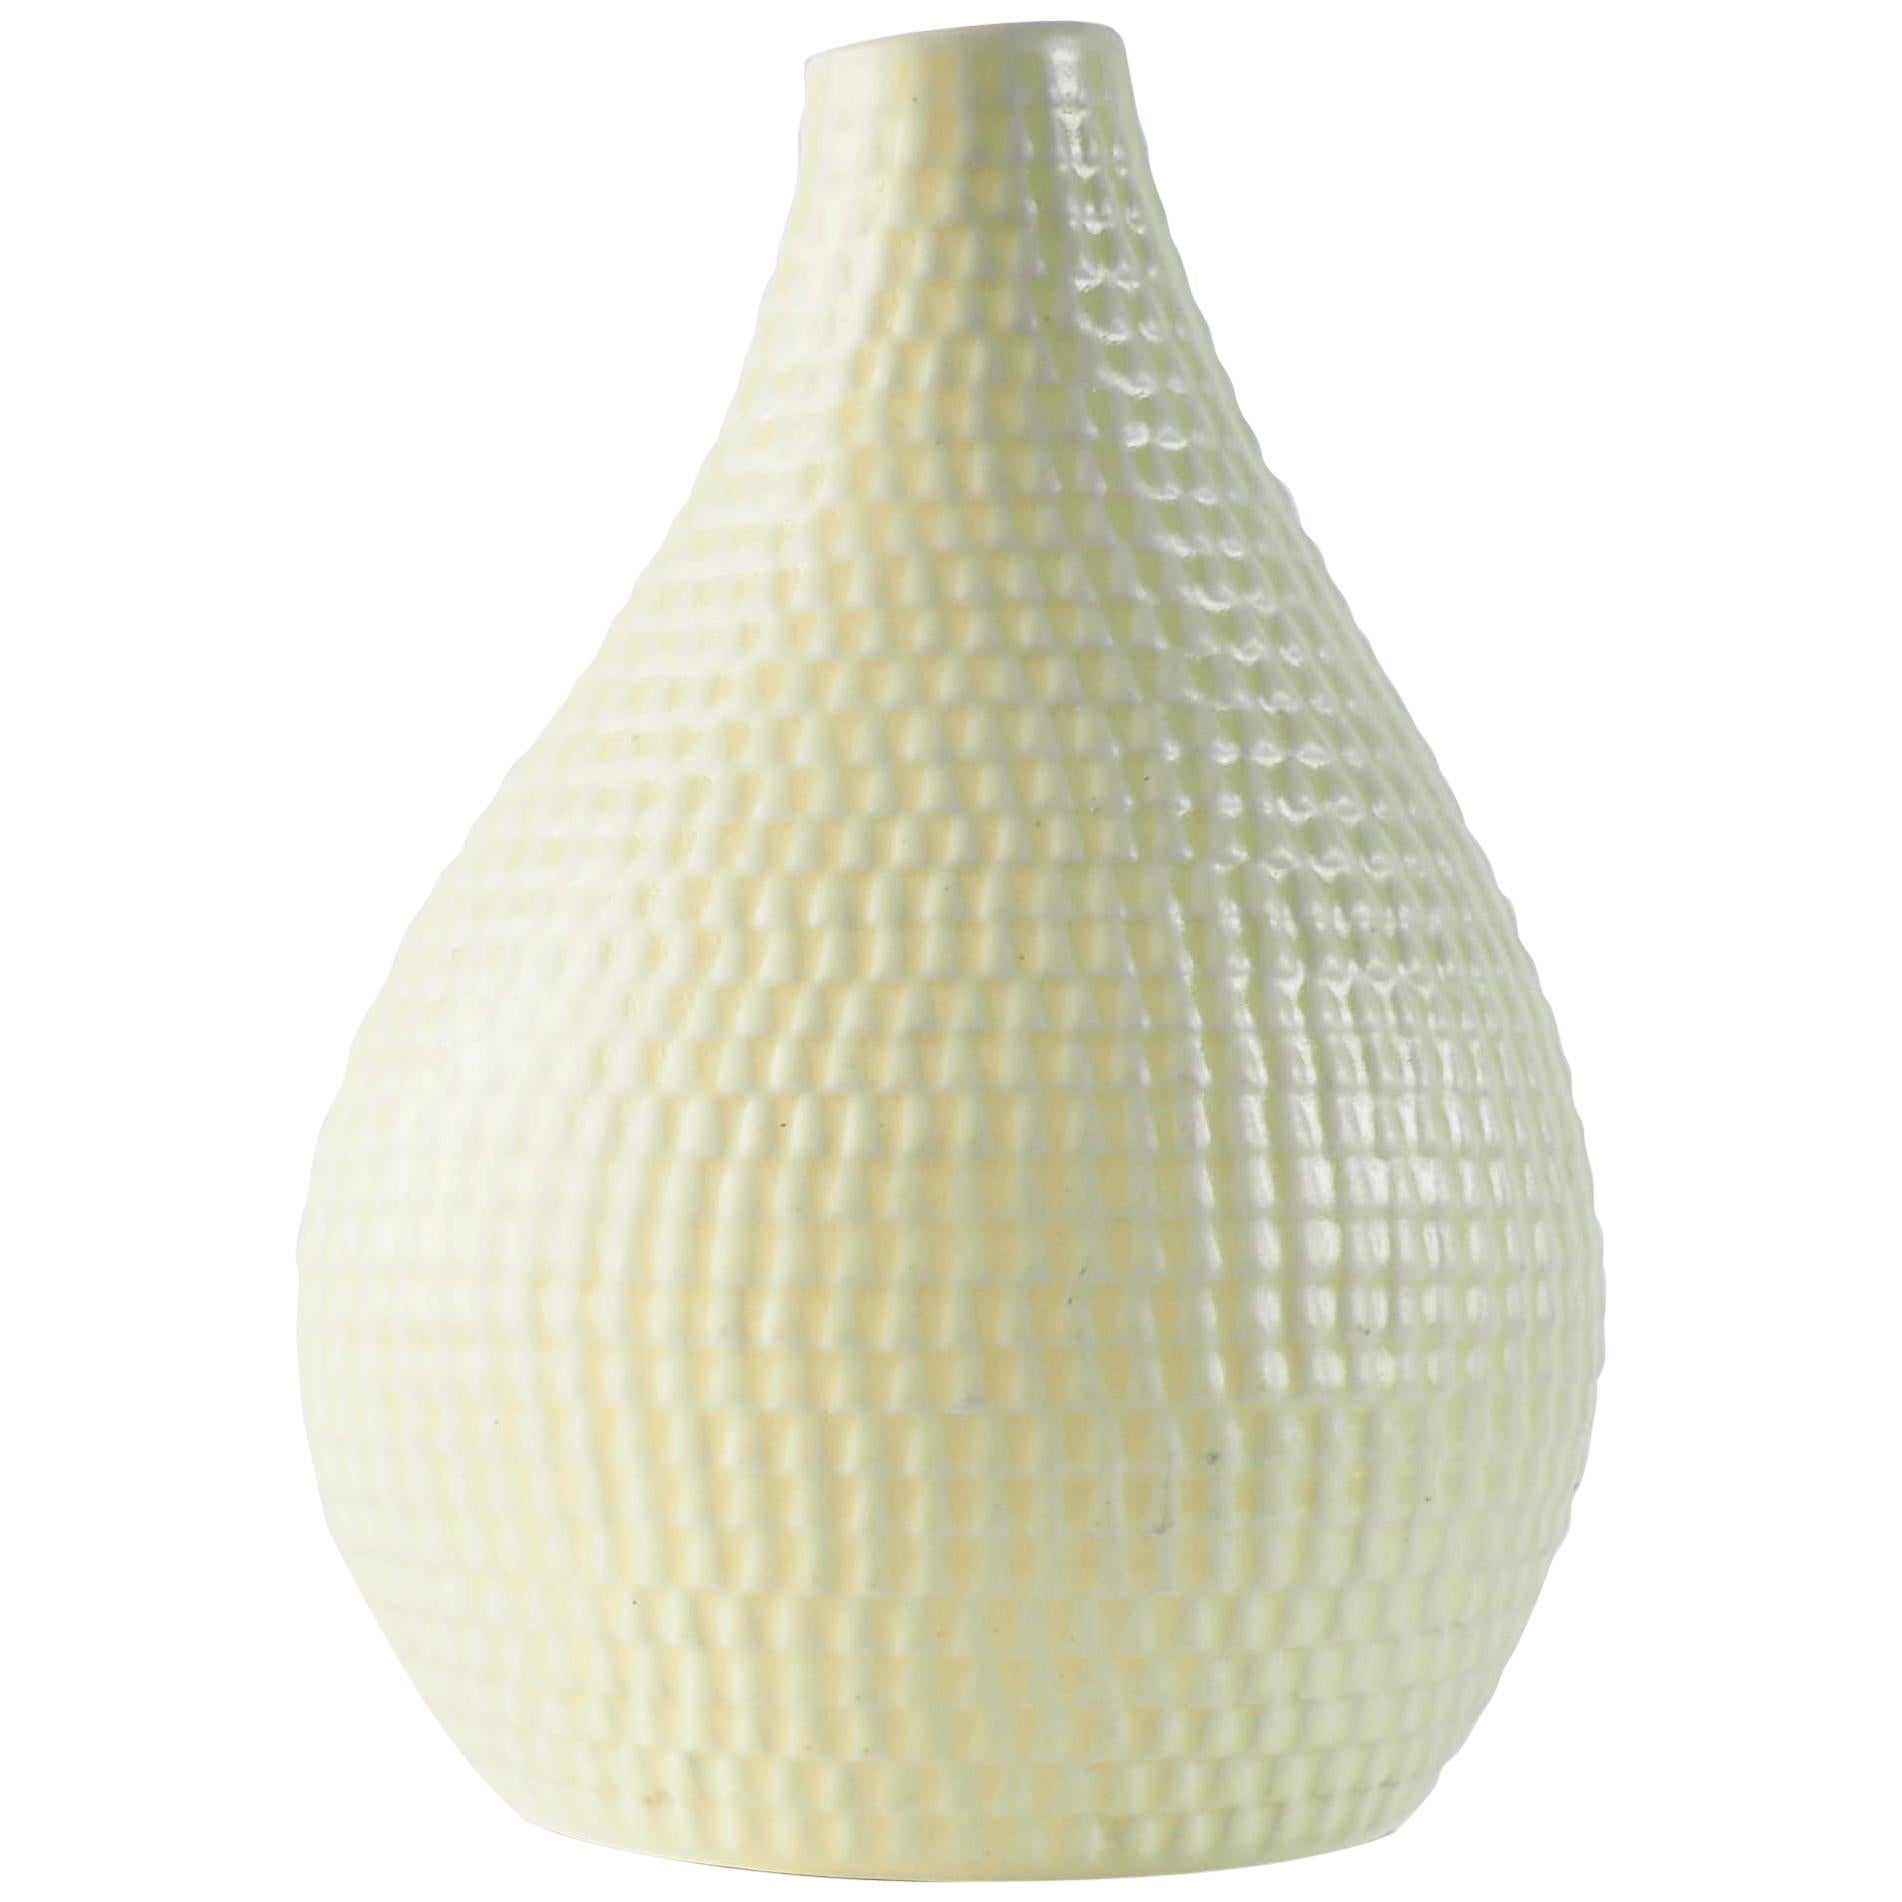 Yellow Vase from the Reptile Series by Stig Lindberg, Gustavsberg, Sweden